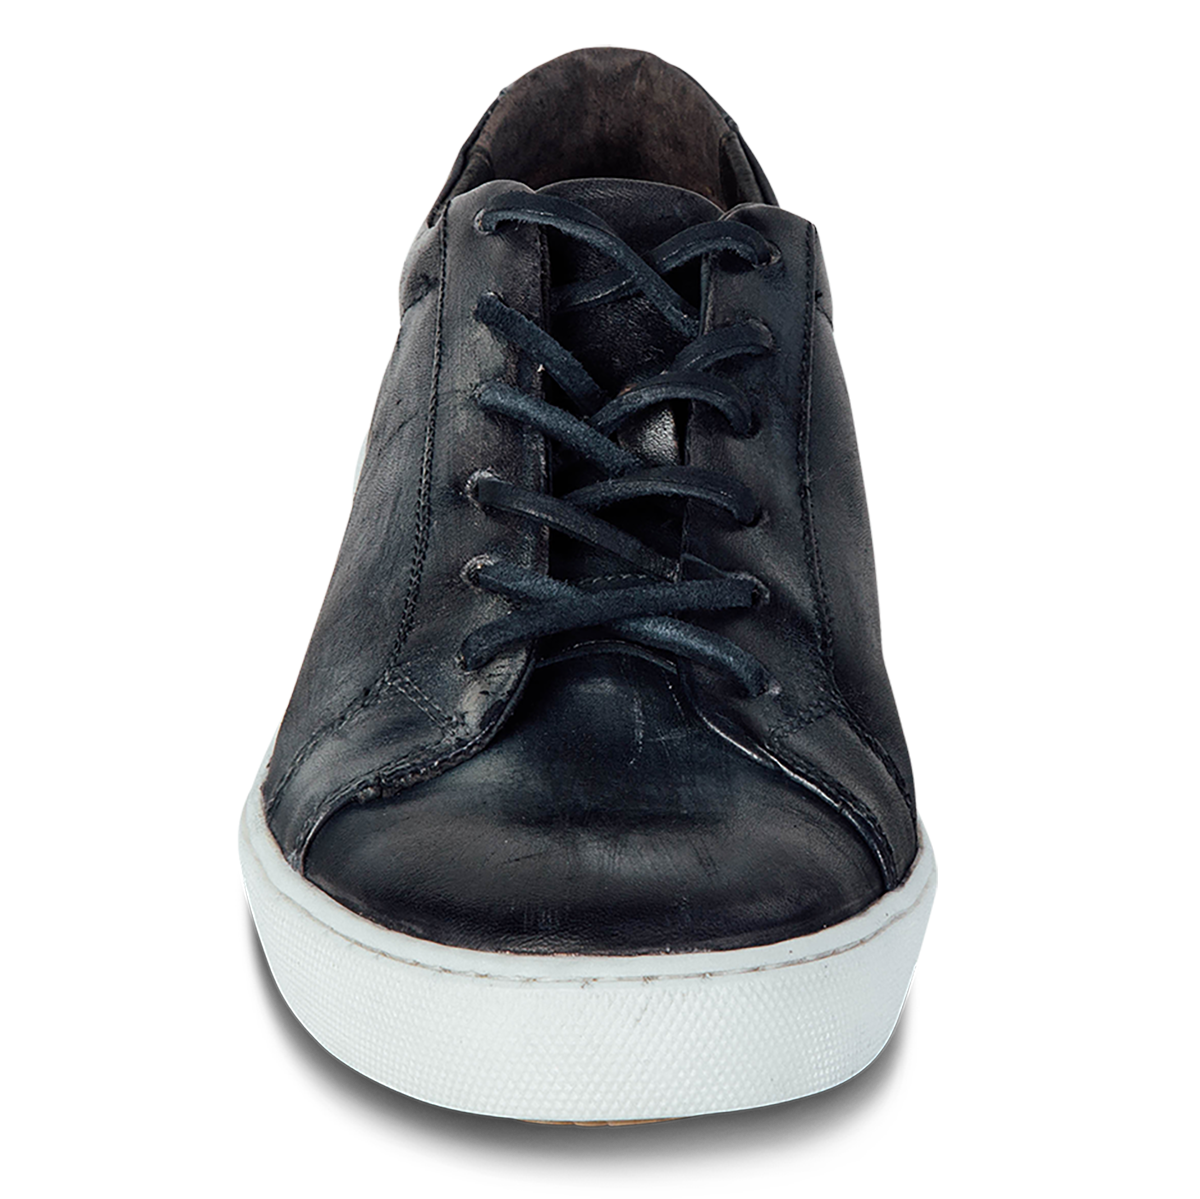 Front view showing leather lace closure on FREEBIRD men's Newport black leather sneaker